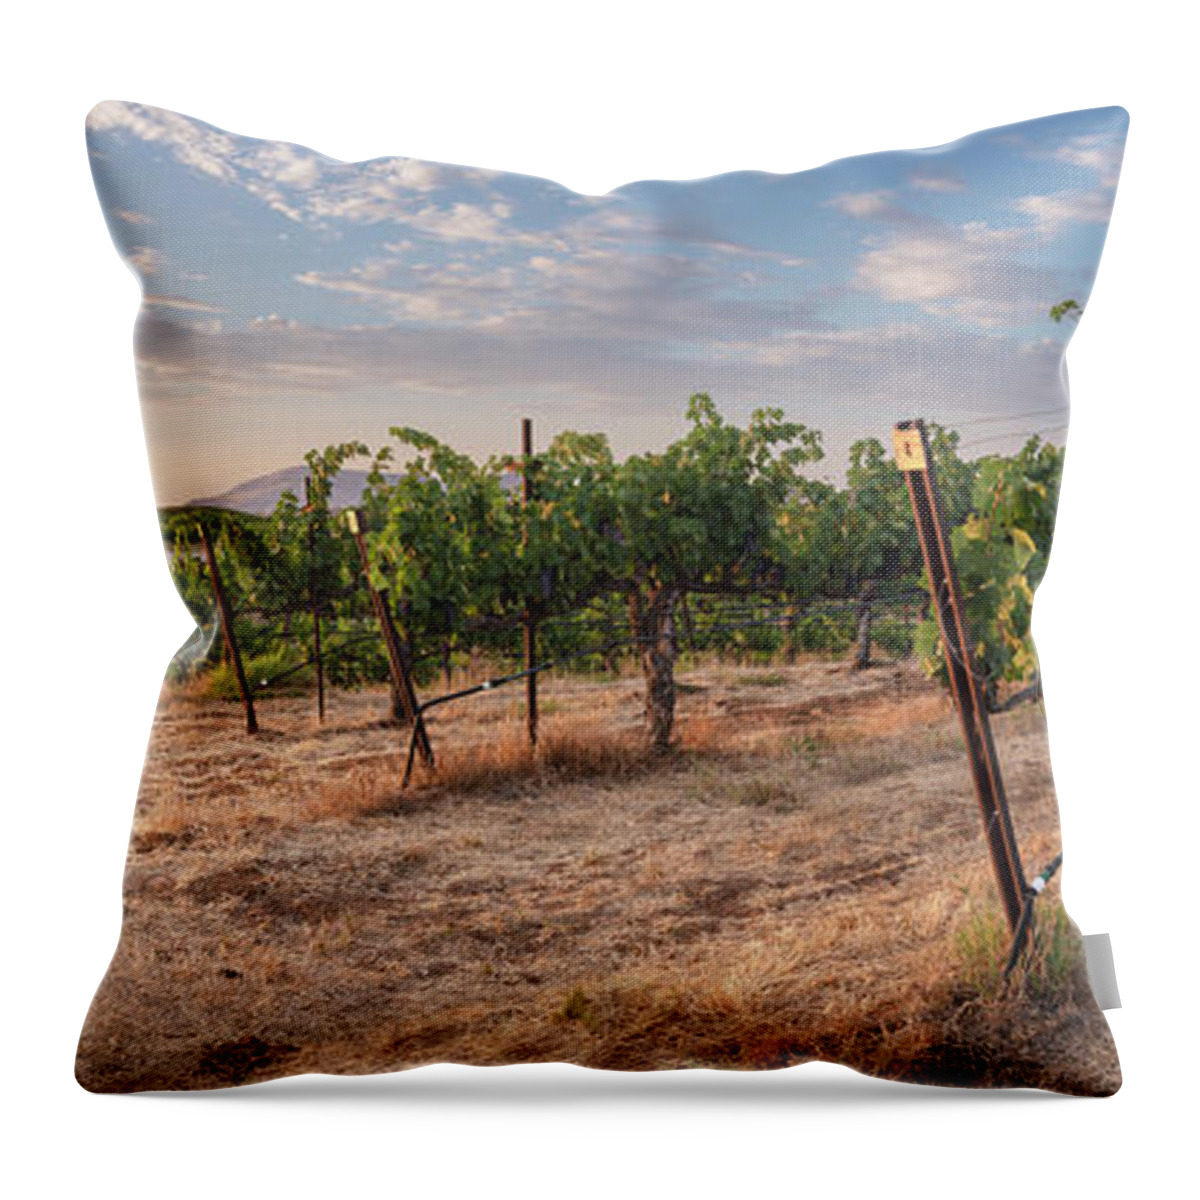 Temecula Throw Pillow featuring the photograph Temecula Vineyard on Rolling Hills by William Dunigan